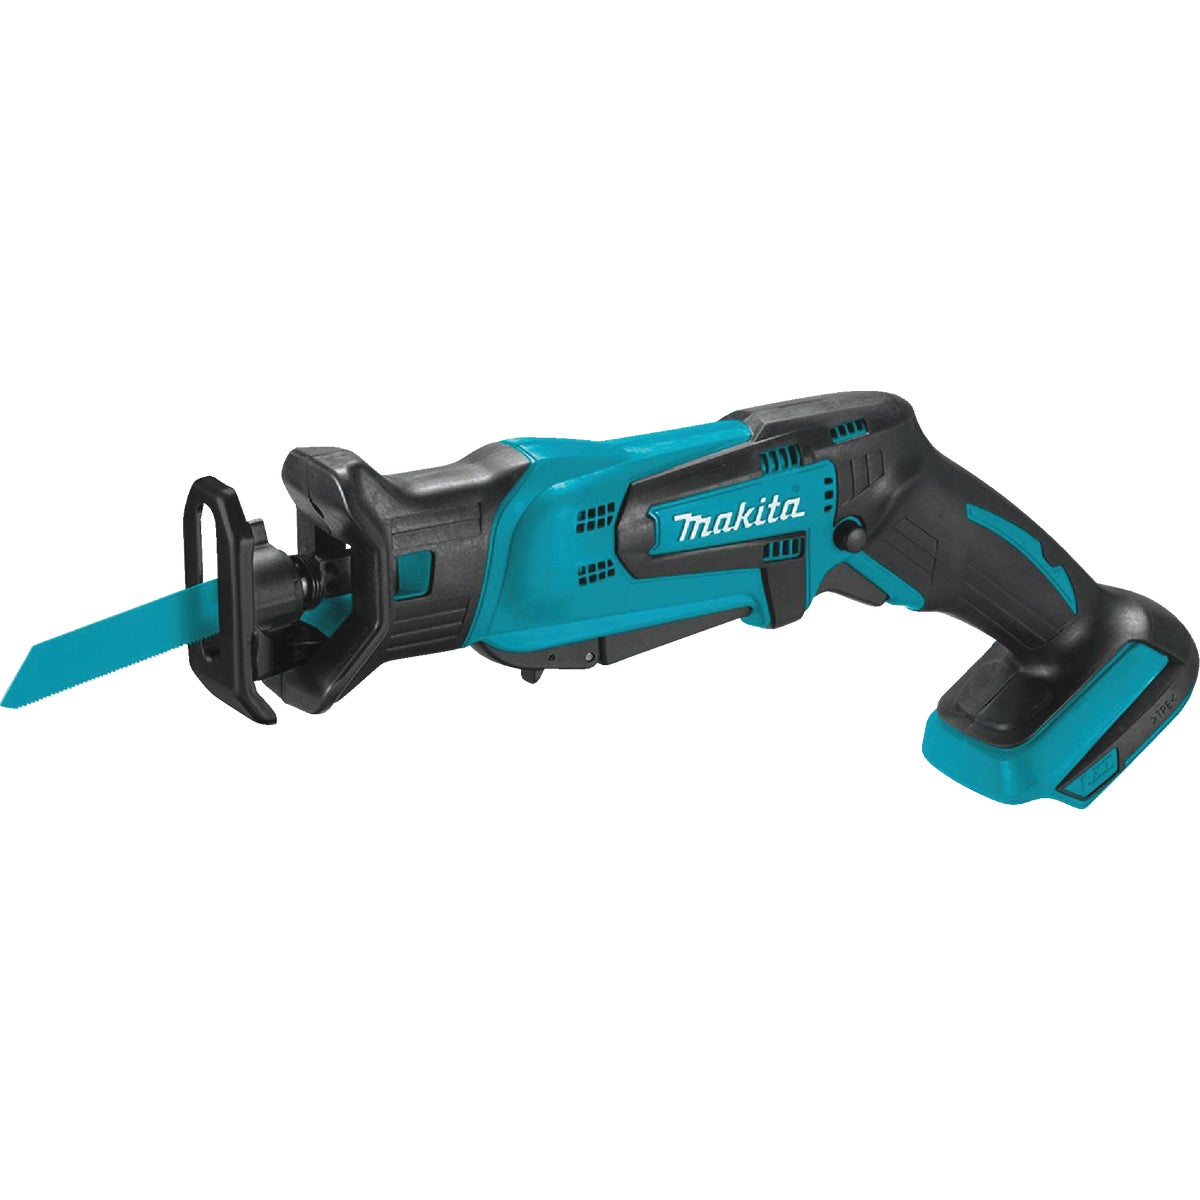 Makita 18 Volt LXT Lithium-Ion Compact Cordless Reciprocating Saw (Tool Only)